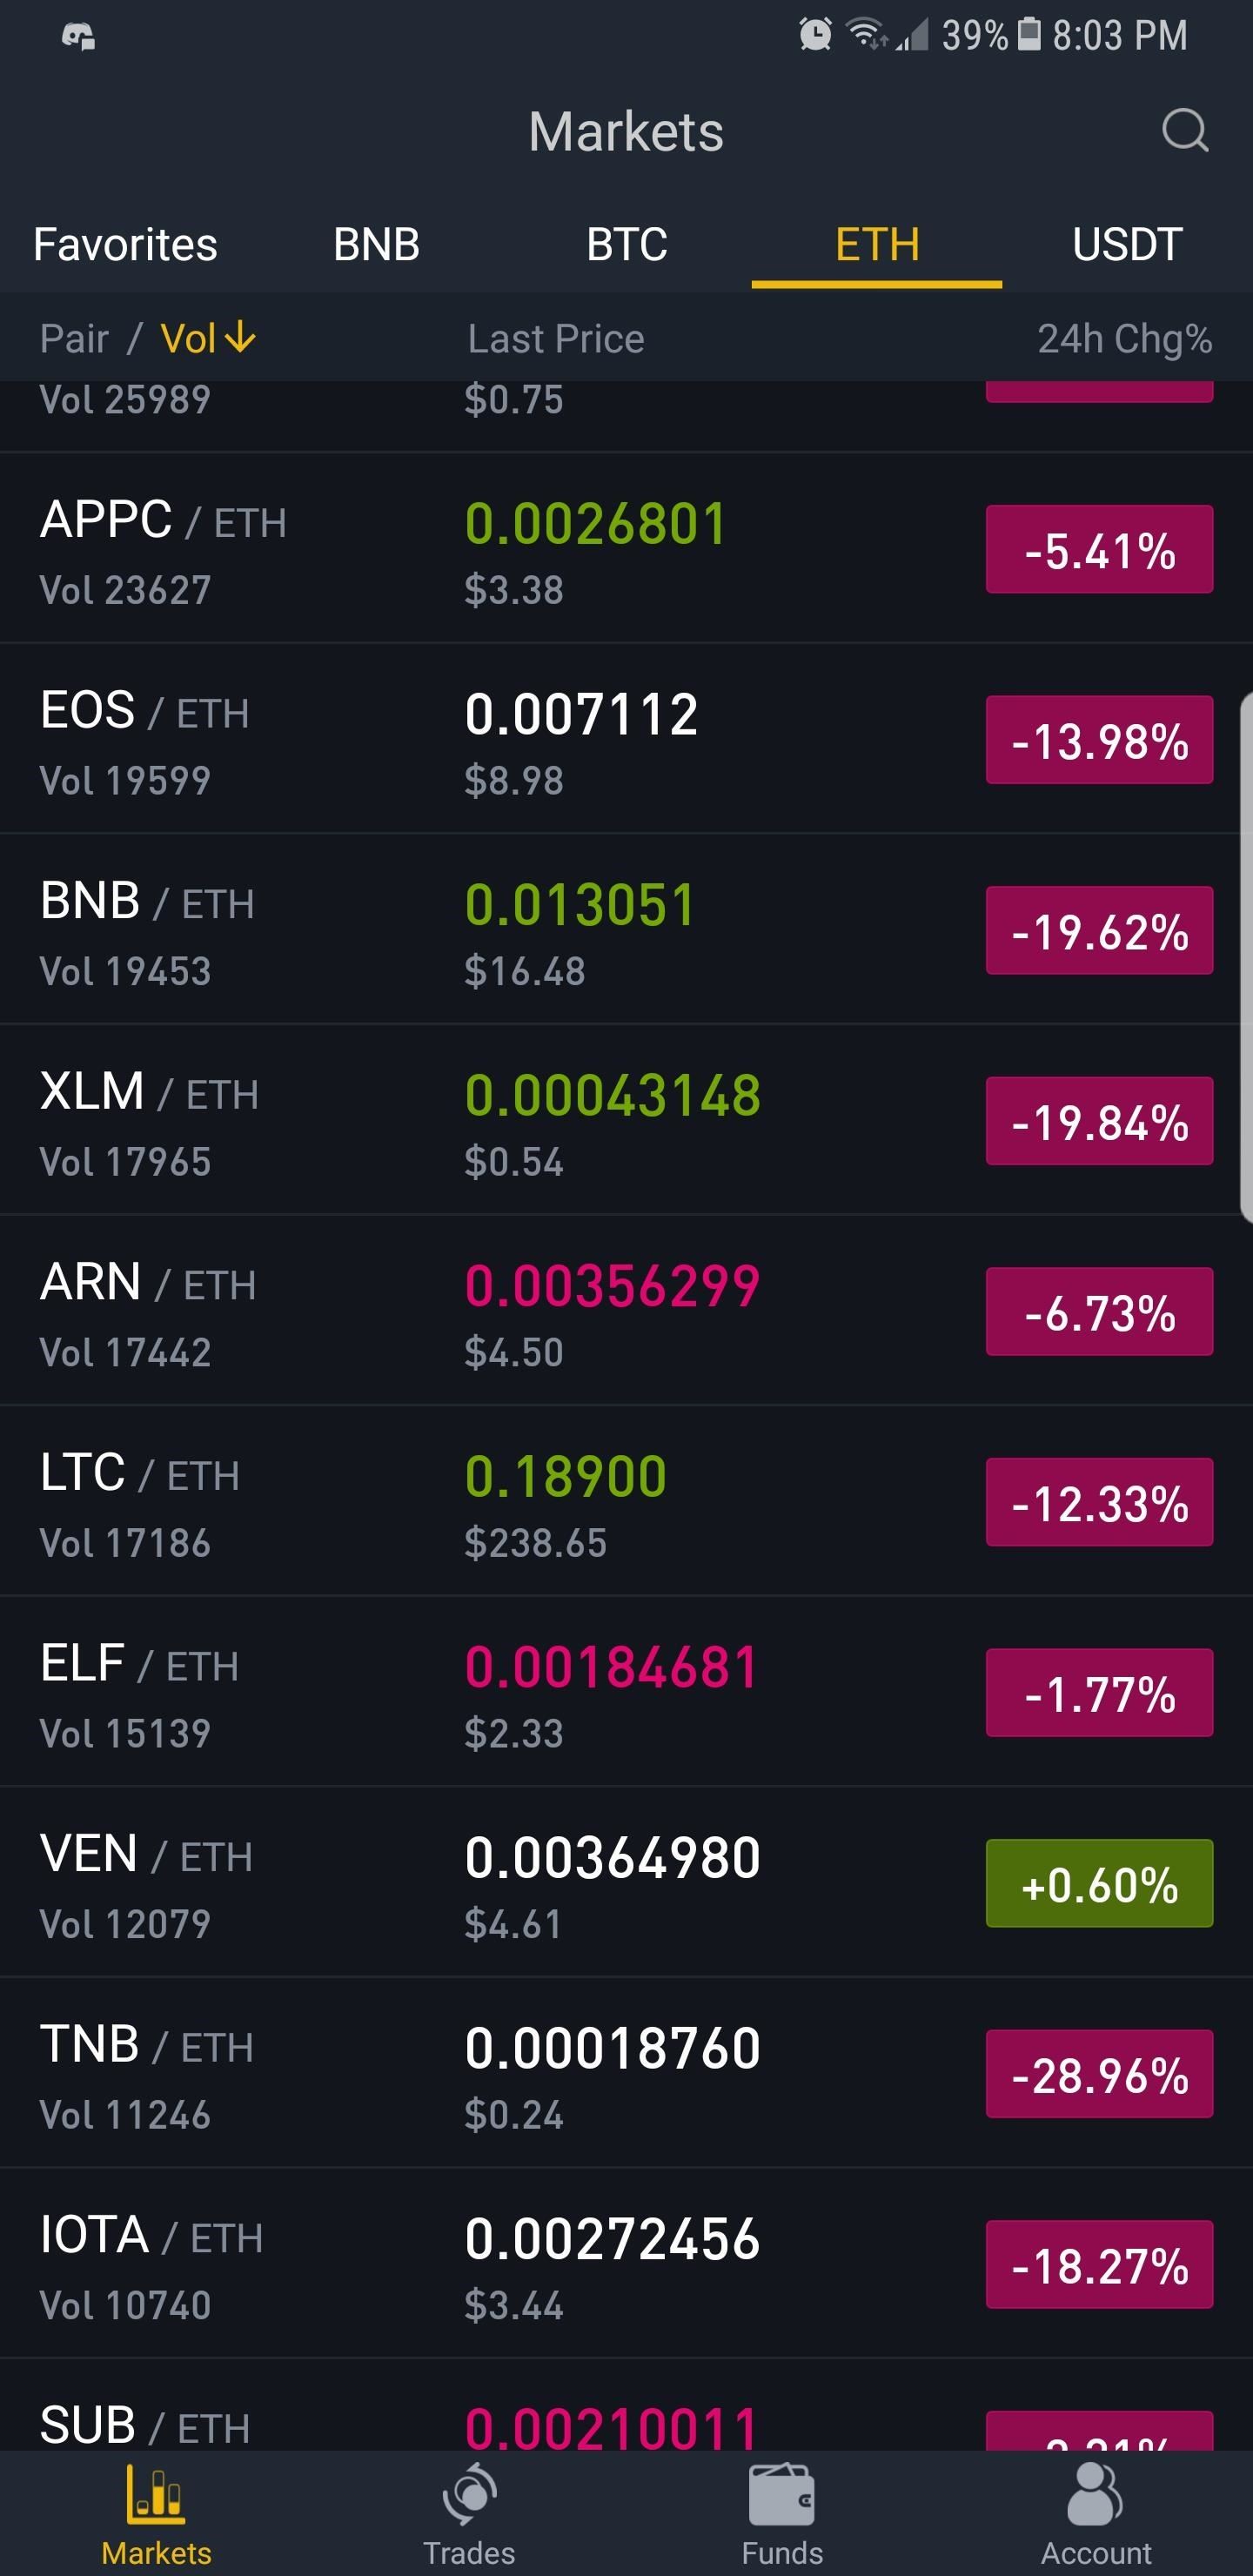 Binance Trading Pairs Help You Keep Track of Your Favorite Coins' Values